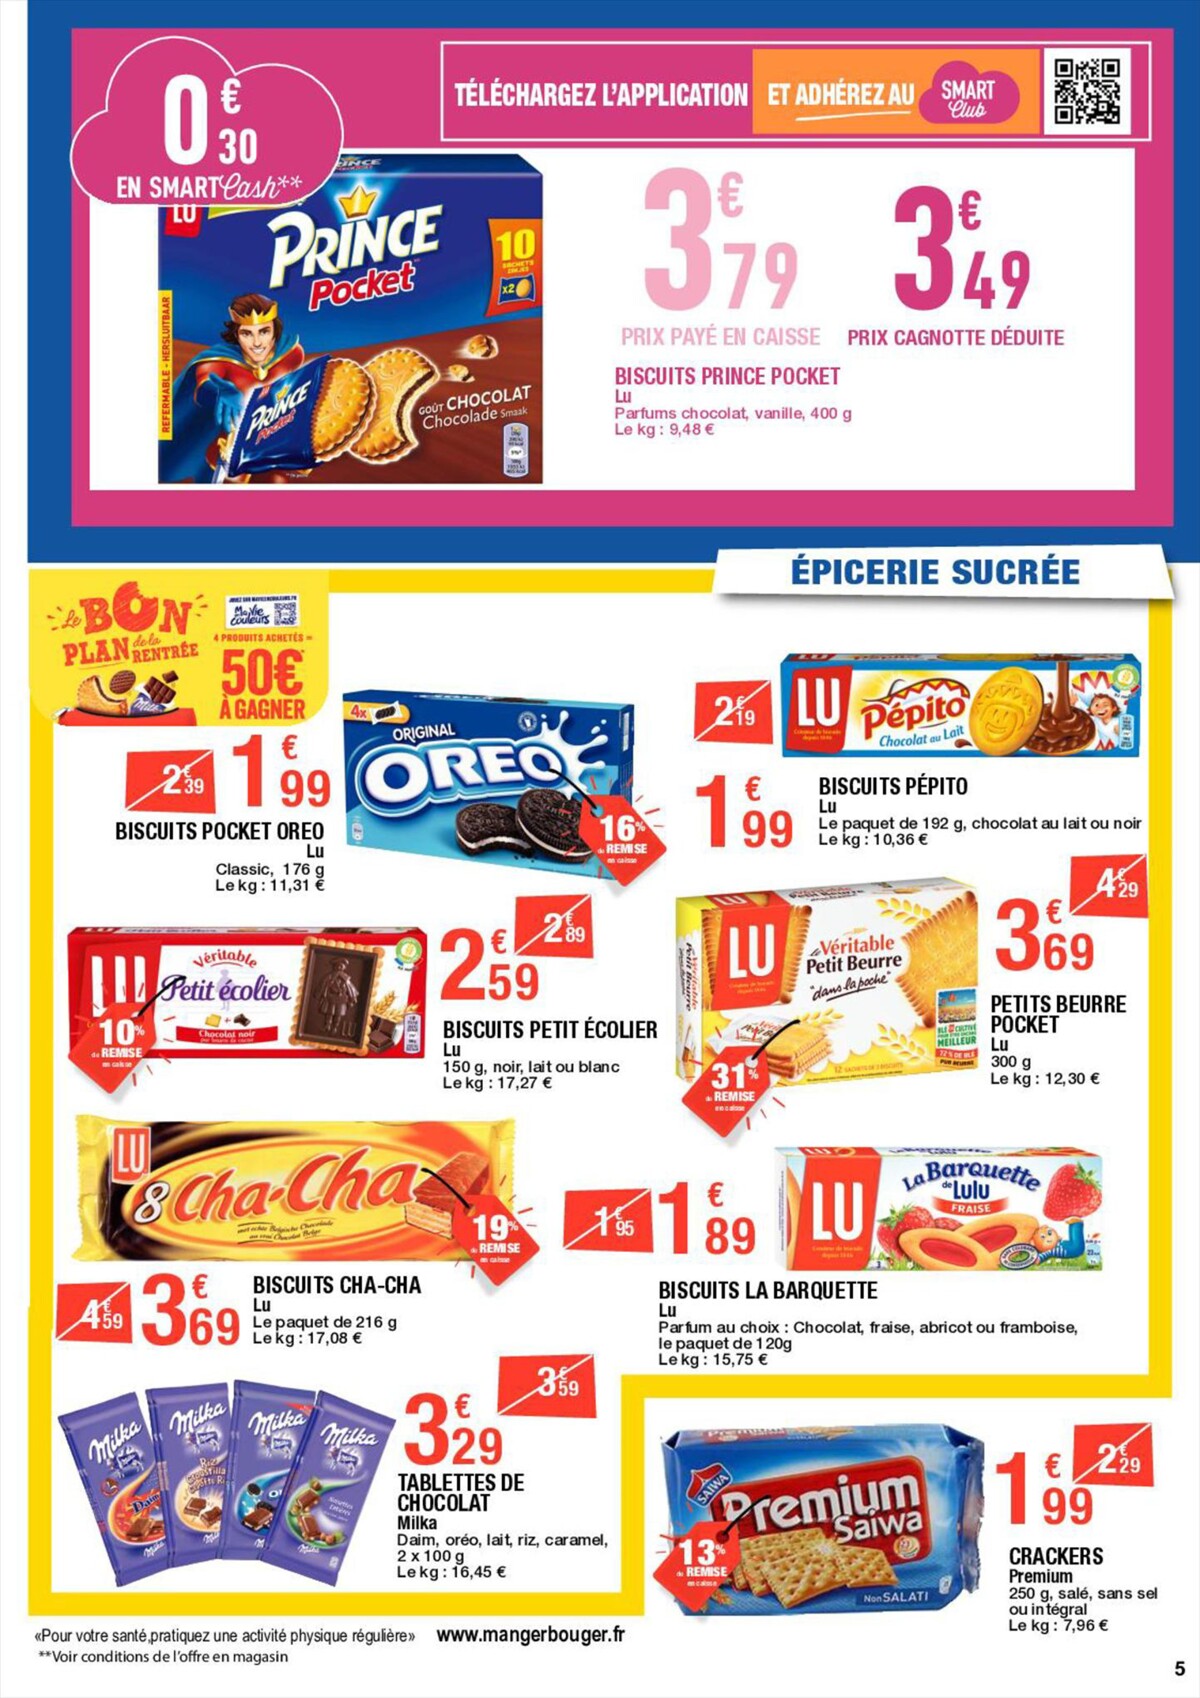 Catalogue Carrefour Special MDD, page 00005